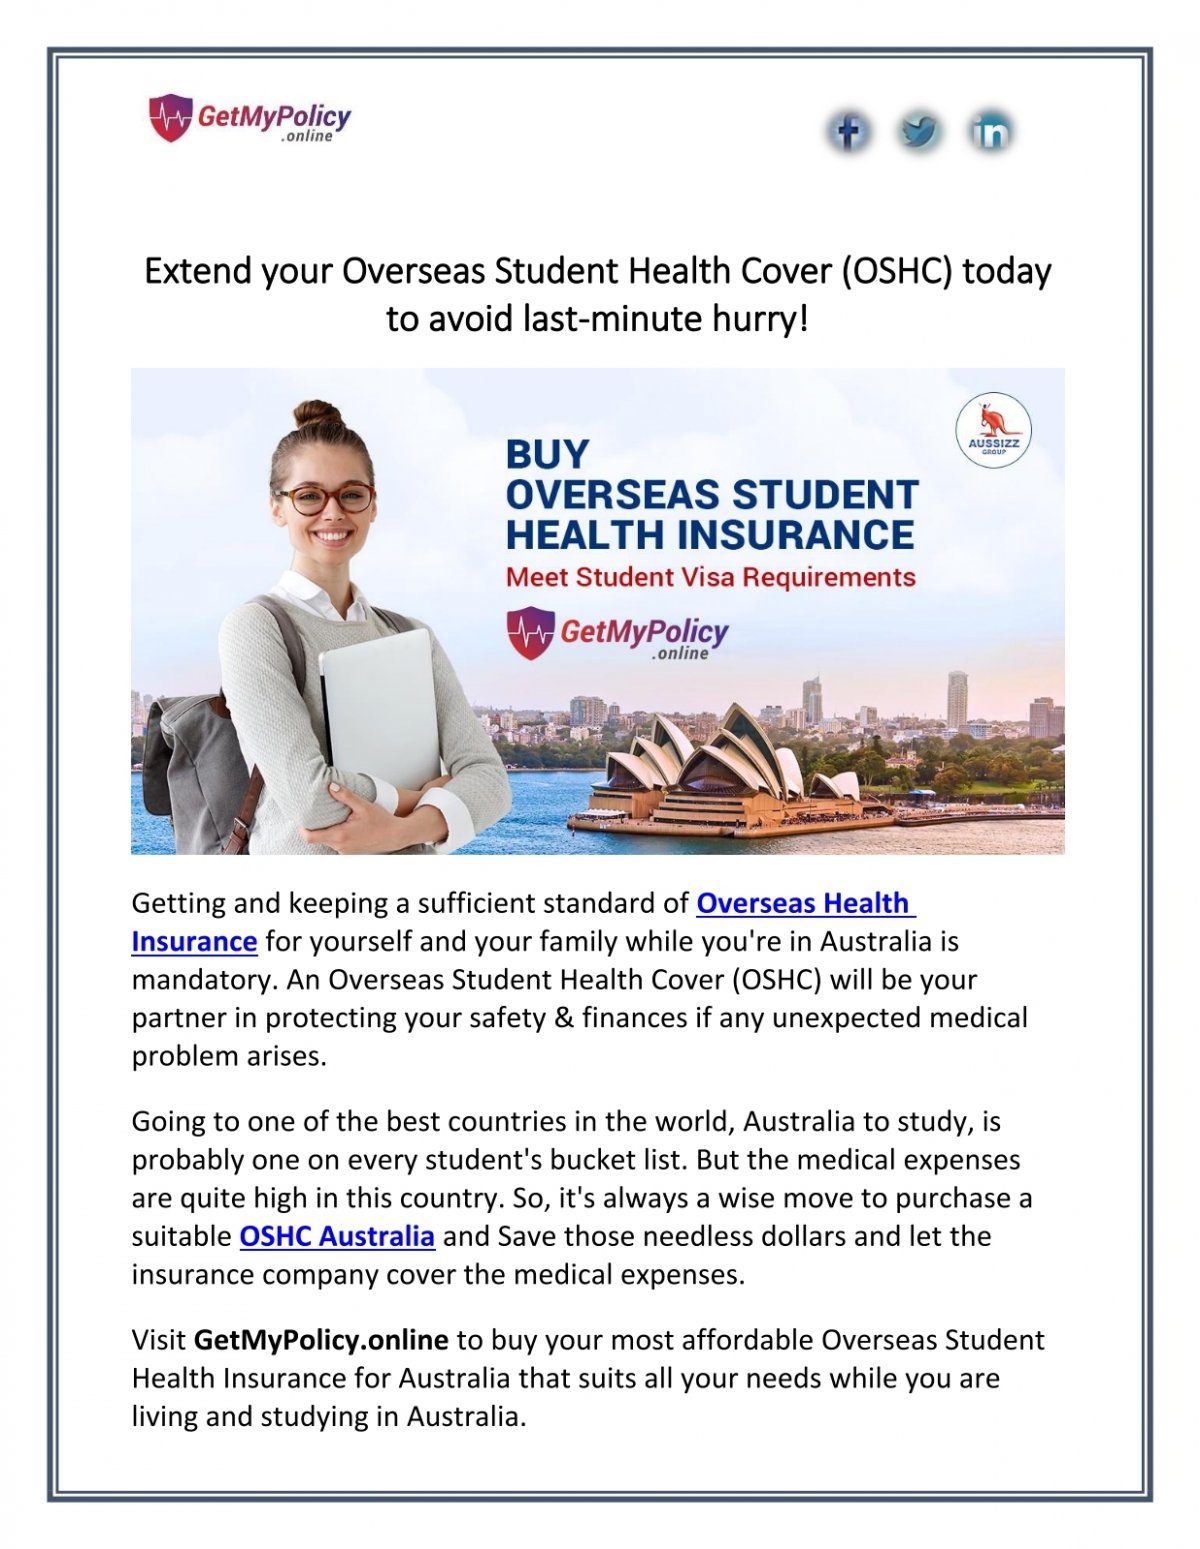 Extend Your Overseas Student Health Cover Oshc Today To Avoid Last Minute Hurry